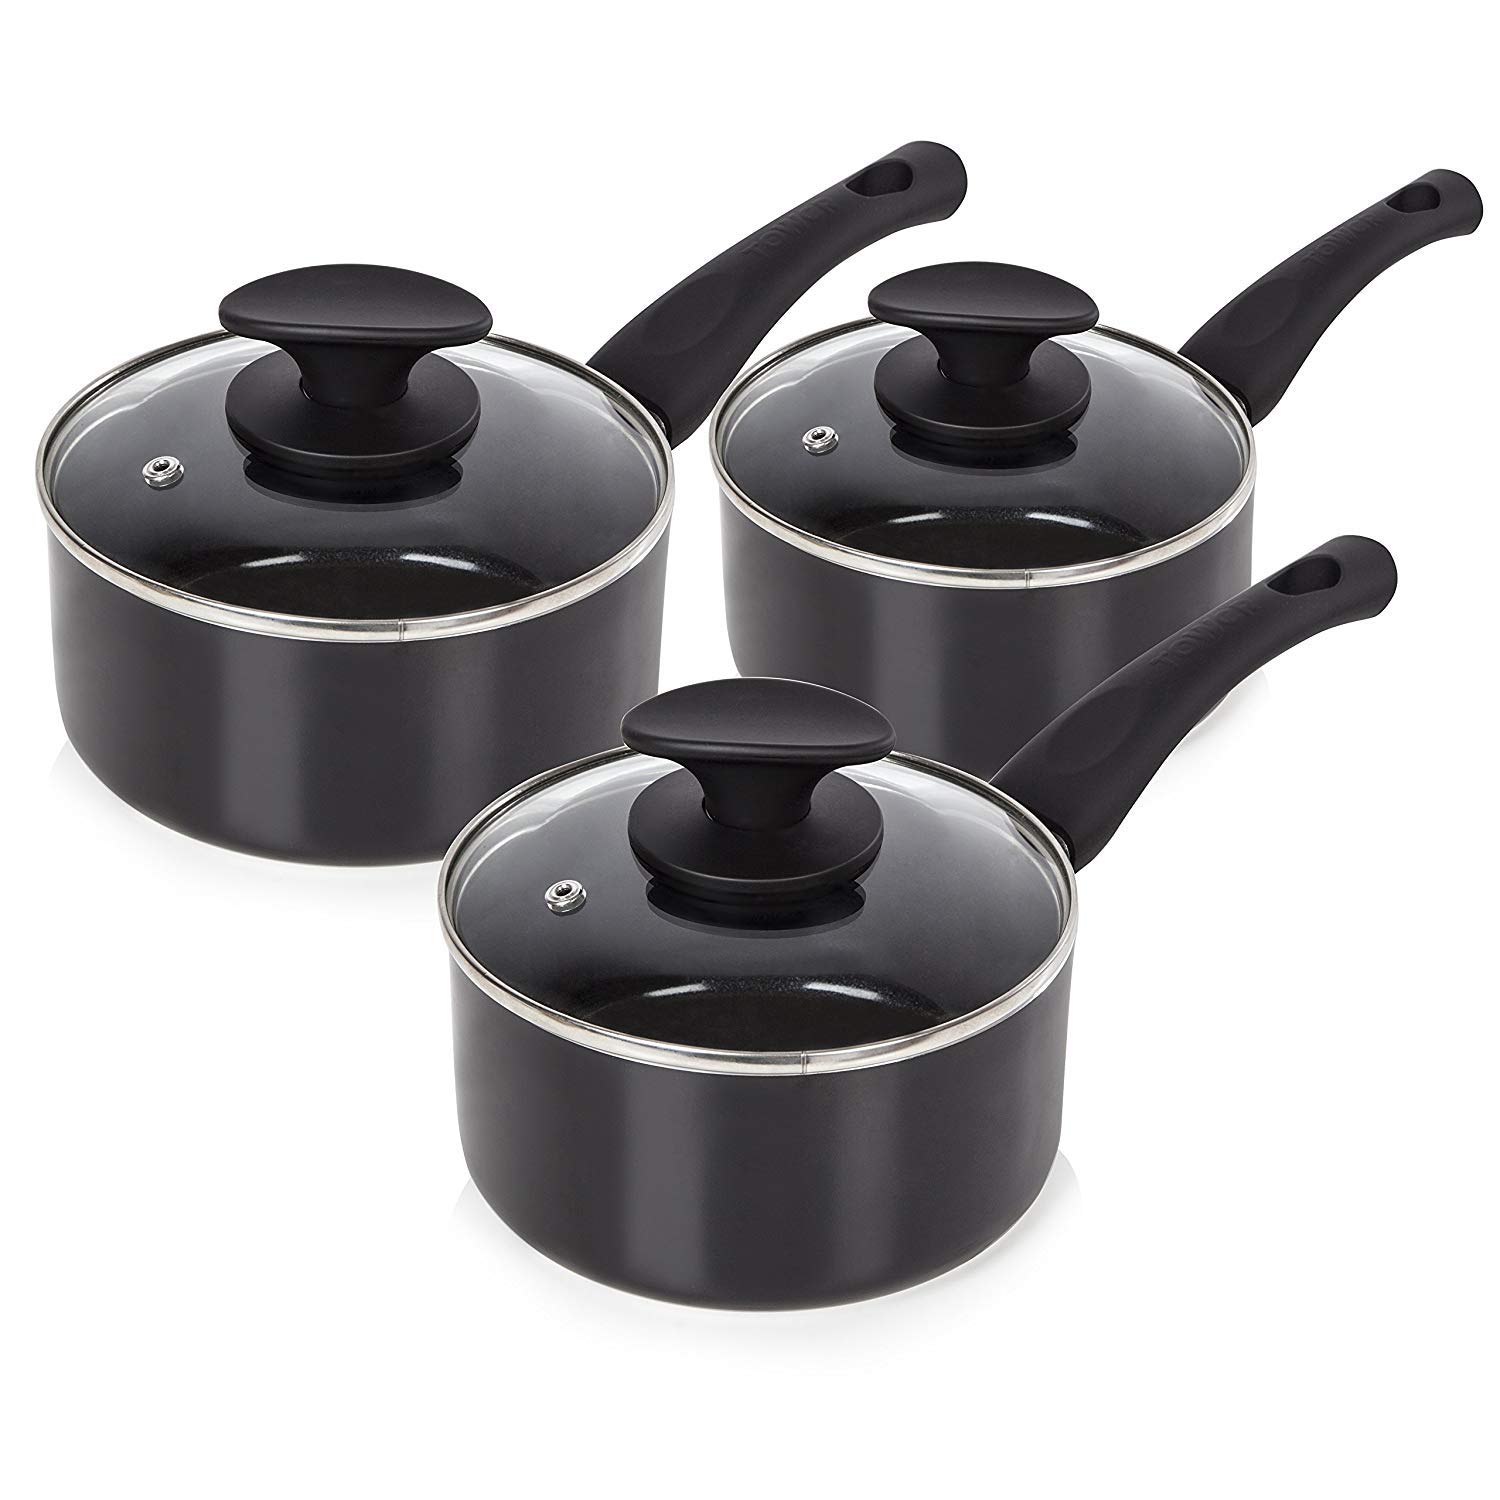 Brand New Details about   Tower T81507 3pce Pan Set Non-Stick Ceramic Inner Coating in Black 